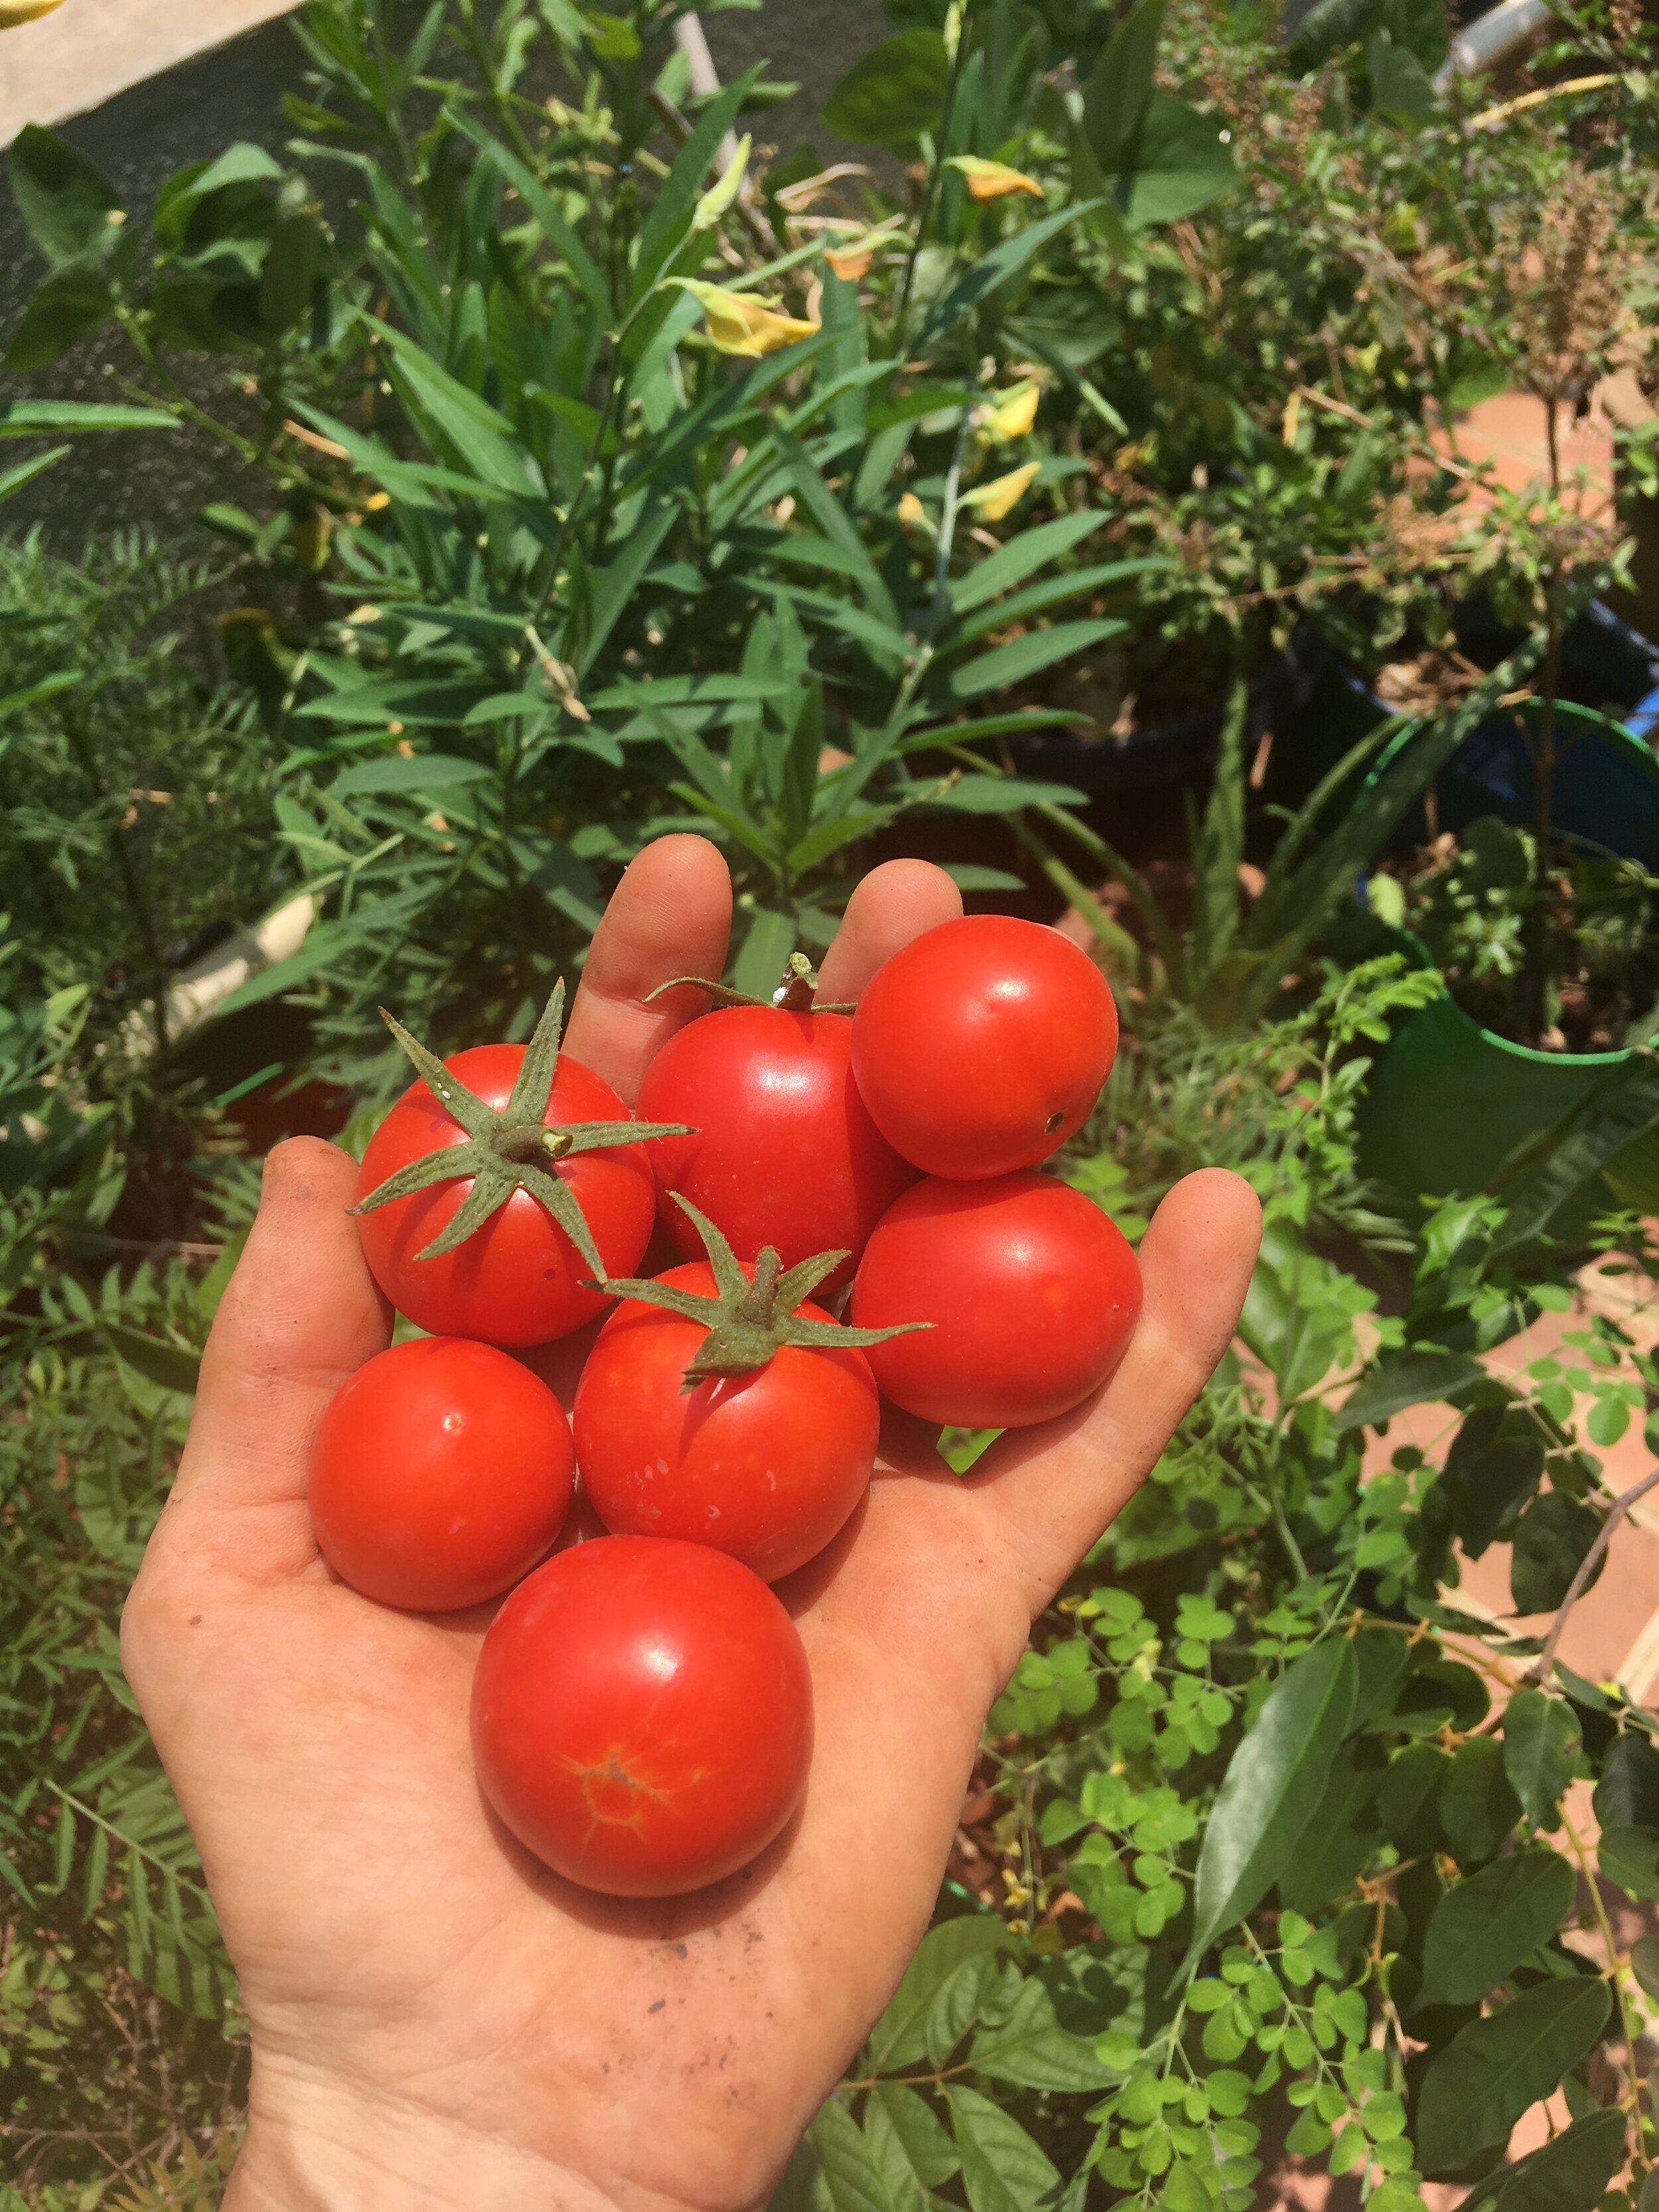  Anyone who has grown their own tomatoes knows there’s no comparison in flavour between homegrown and shop bought. 